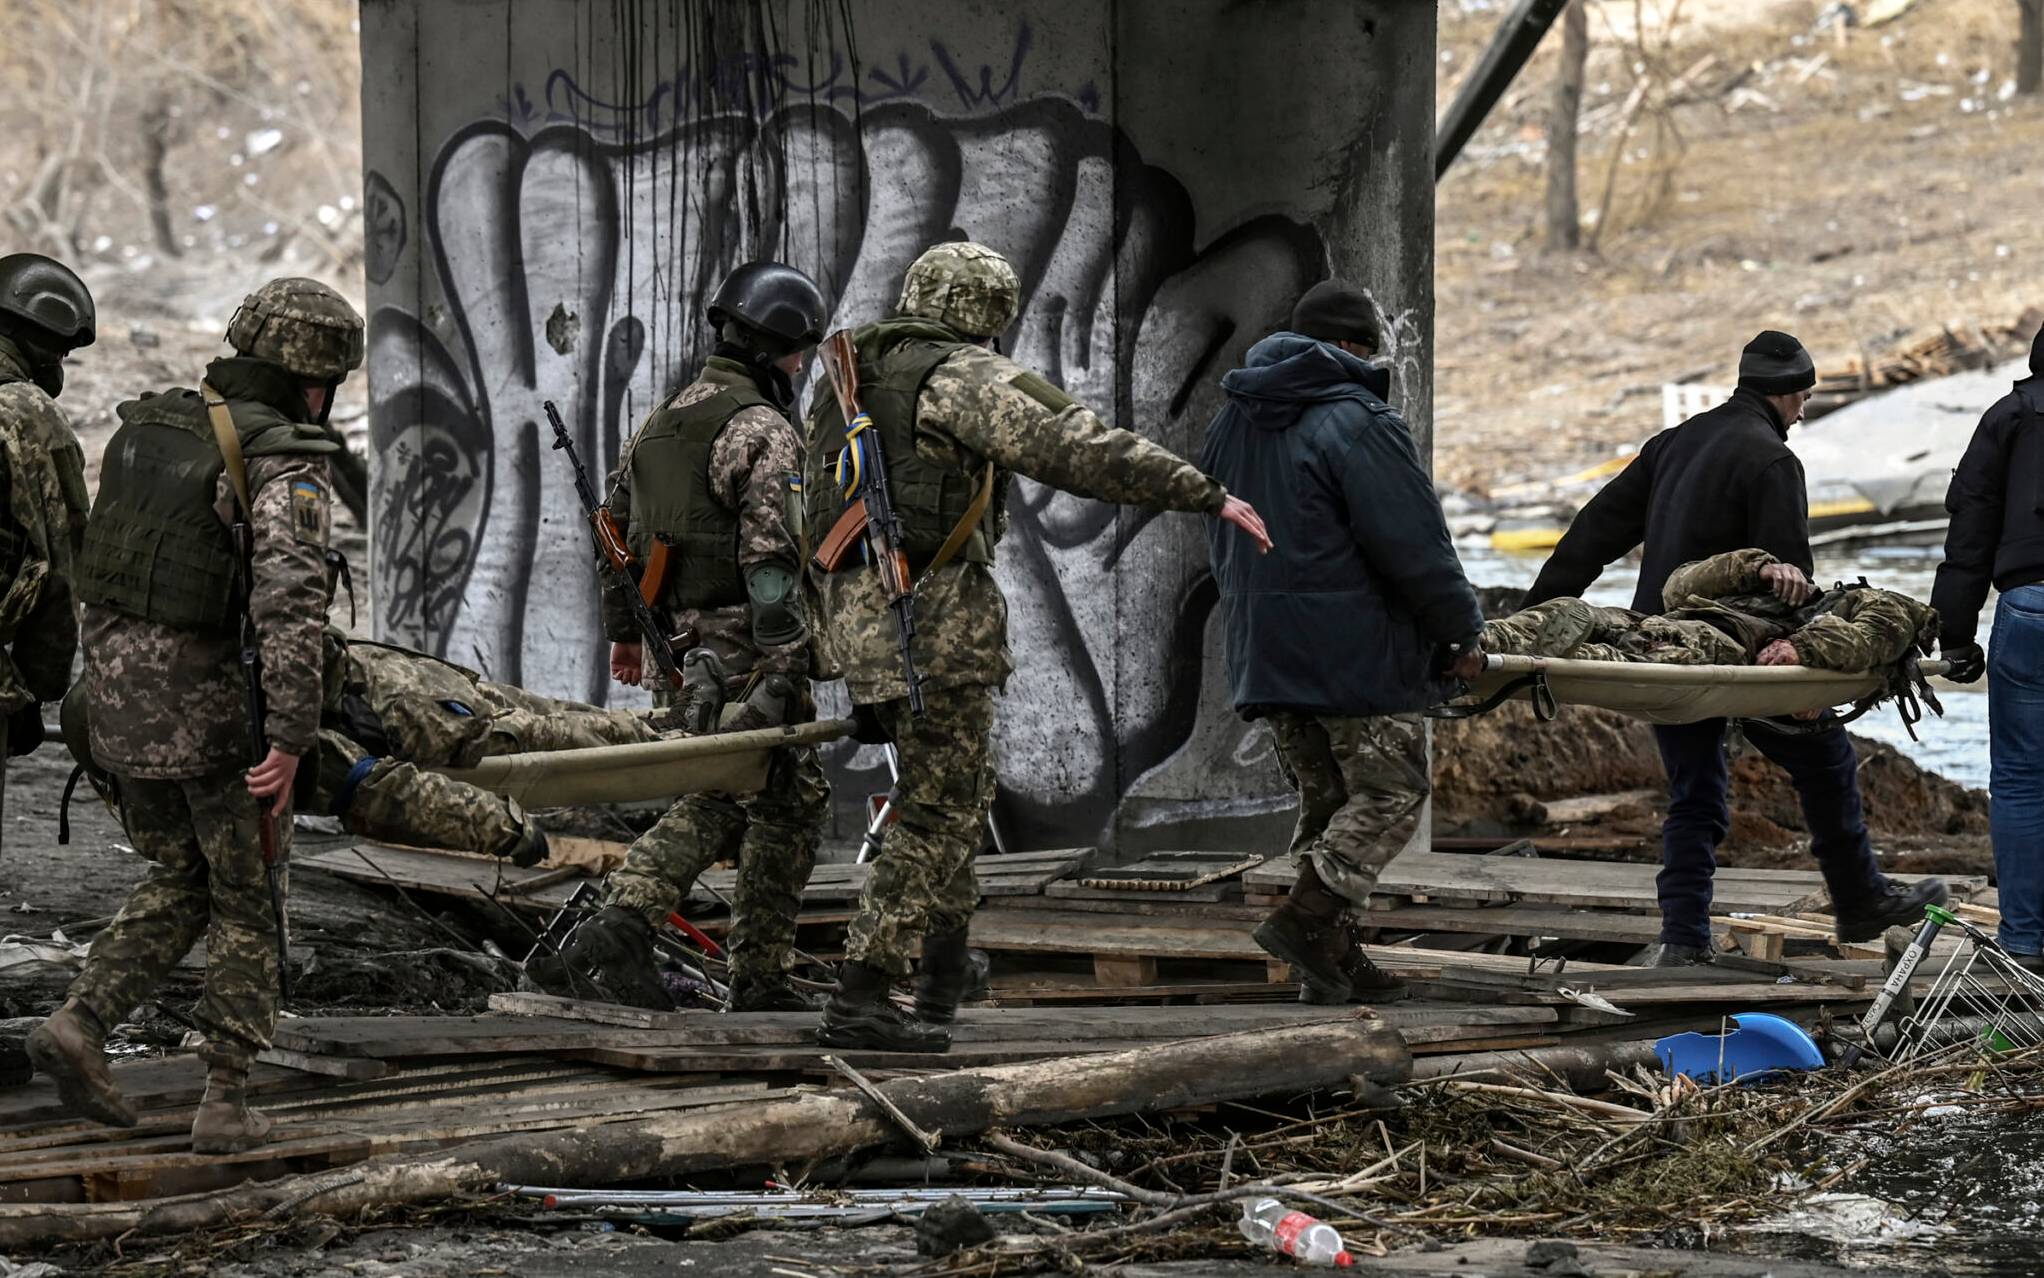 EDITORS NOTE: Graphic content / Ukranian servicemen carry the body of comrades on stretchers in the city of Irpin, northwest of Kyiv, on March 13, 2022. - Russian forces advance ever closer to the capital from the north, west and northeast. Russian strikes also destroy an airport in the town of Vasylkiv, south of Kyiv. A US journalist was shot dead and another wounded in Irpin, a frontline northwest suburb of Kyiv, medics and witnesses told AFP. (Photo by Aris Messinis / AFP)